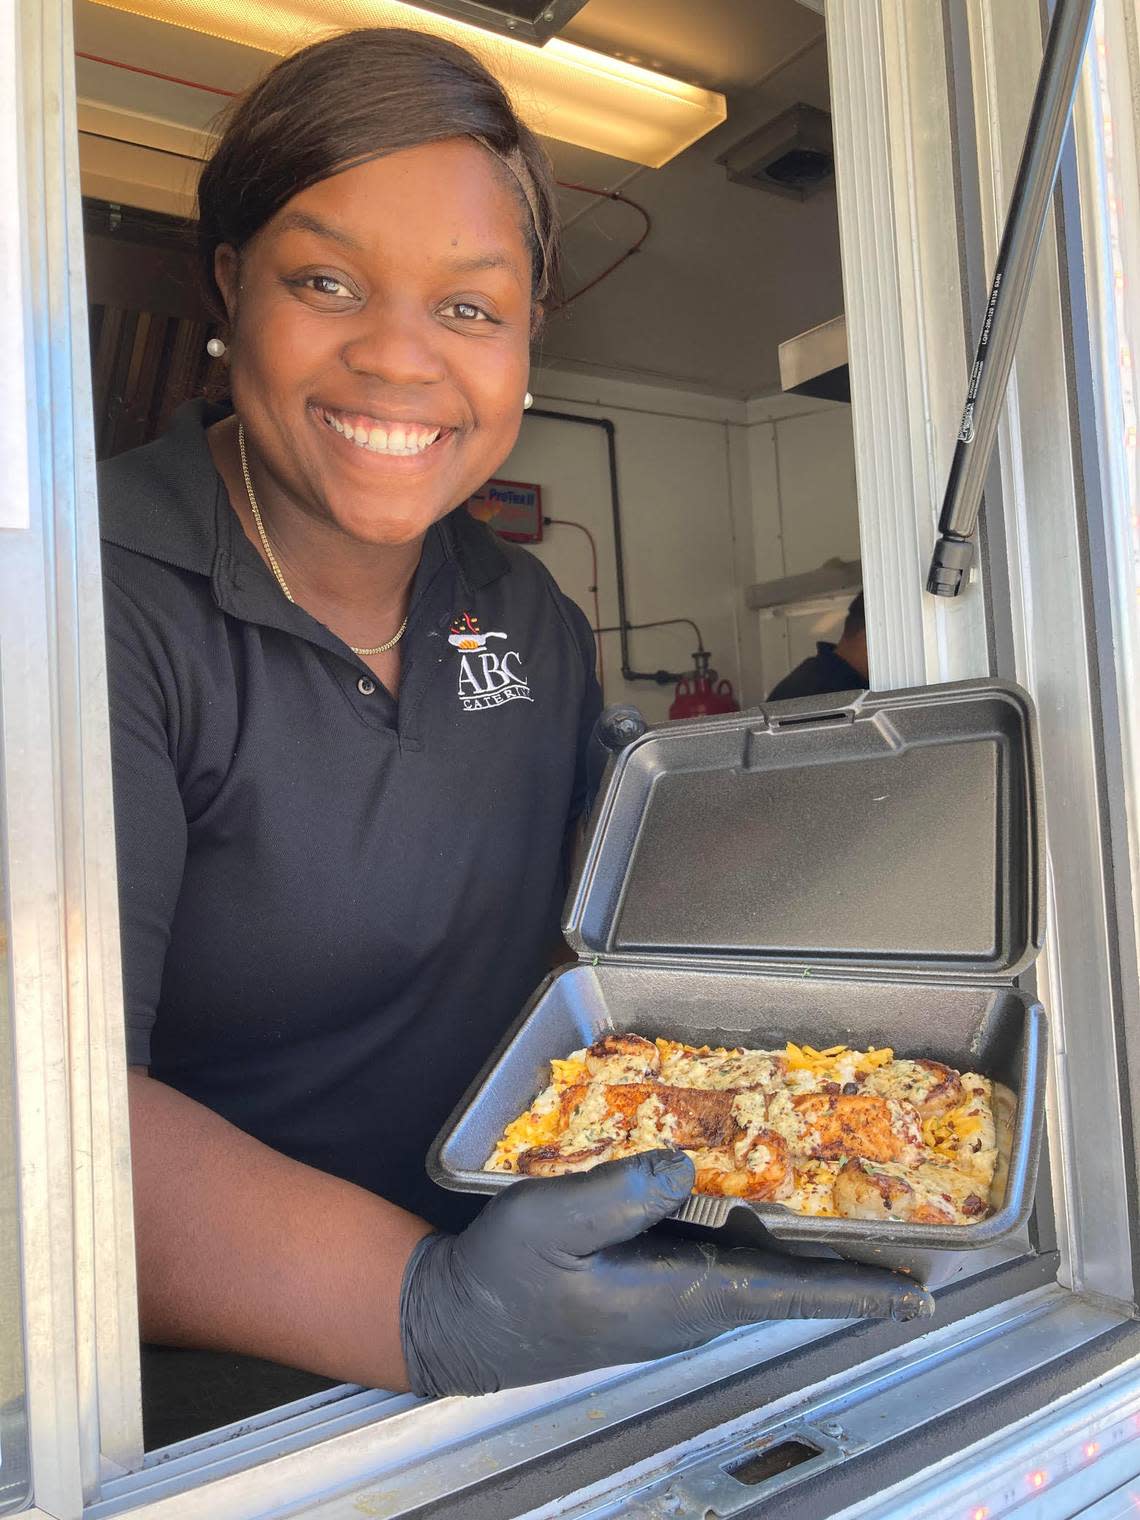 Allegra Lowe, owner of ABC Catering LLC, serves up salmon, shrimp and grits from her food truck.